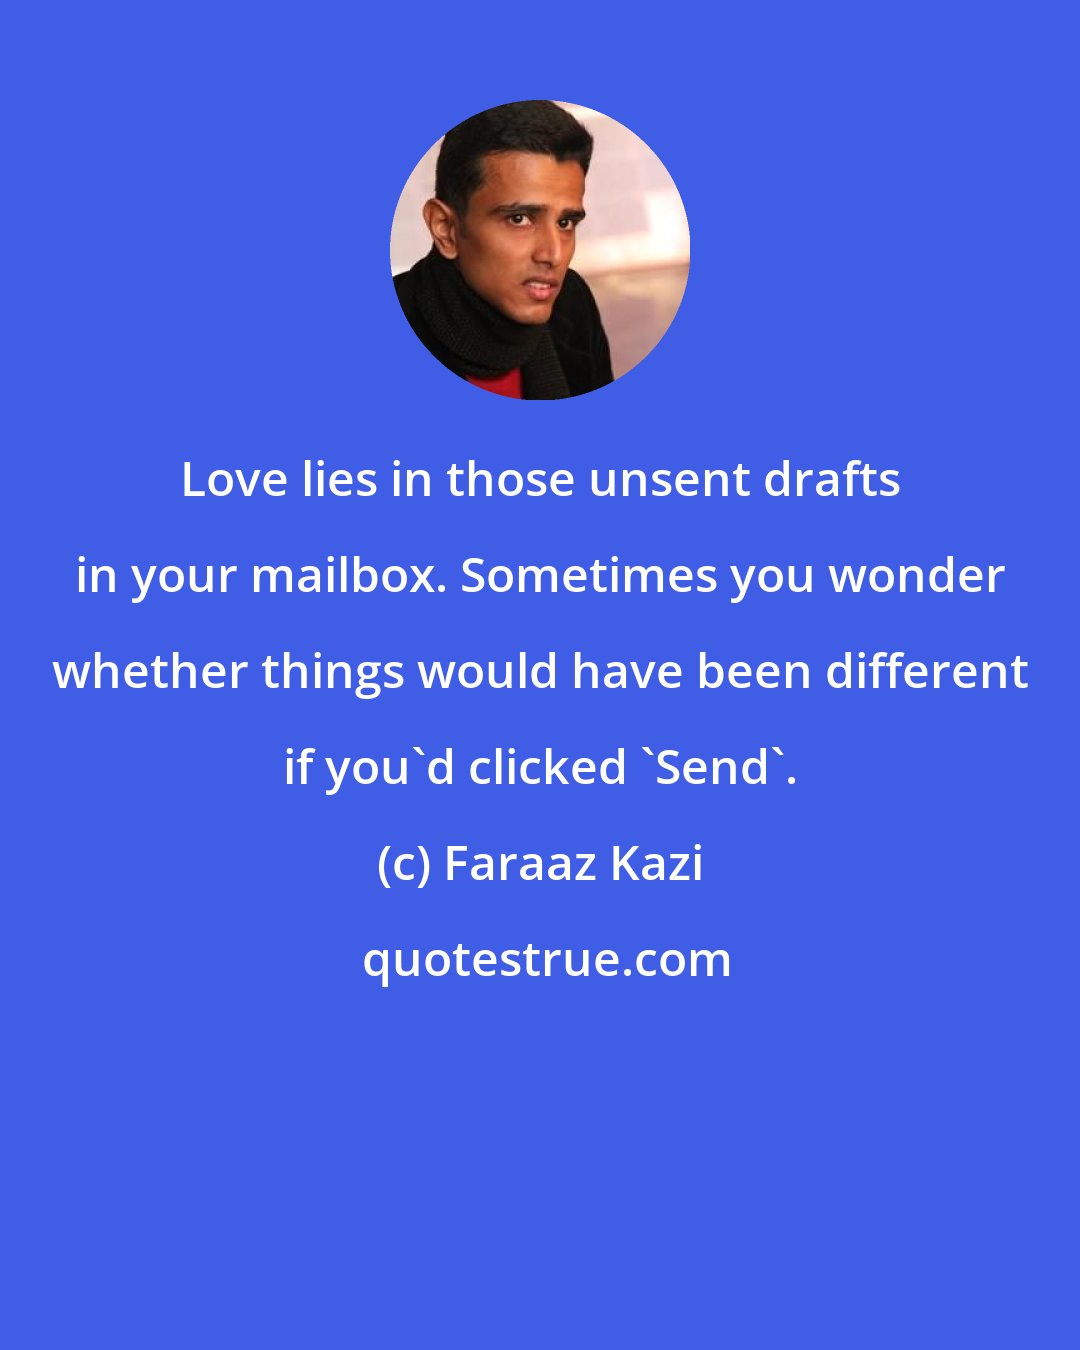 Faraaz Kazi: Love lies in those unsent drafts in your mailbox. Sometimes you wonder whether things would have been different if you'd clicked 'Send'.